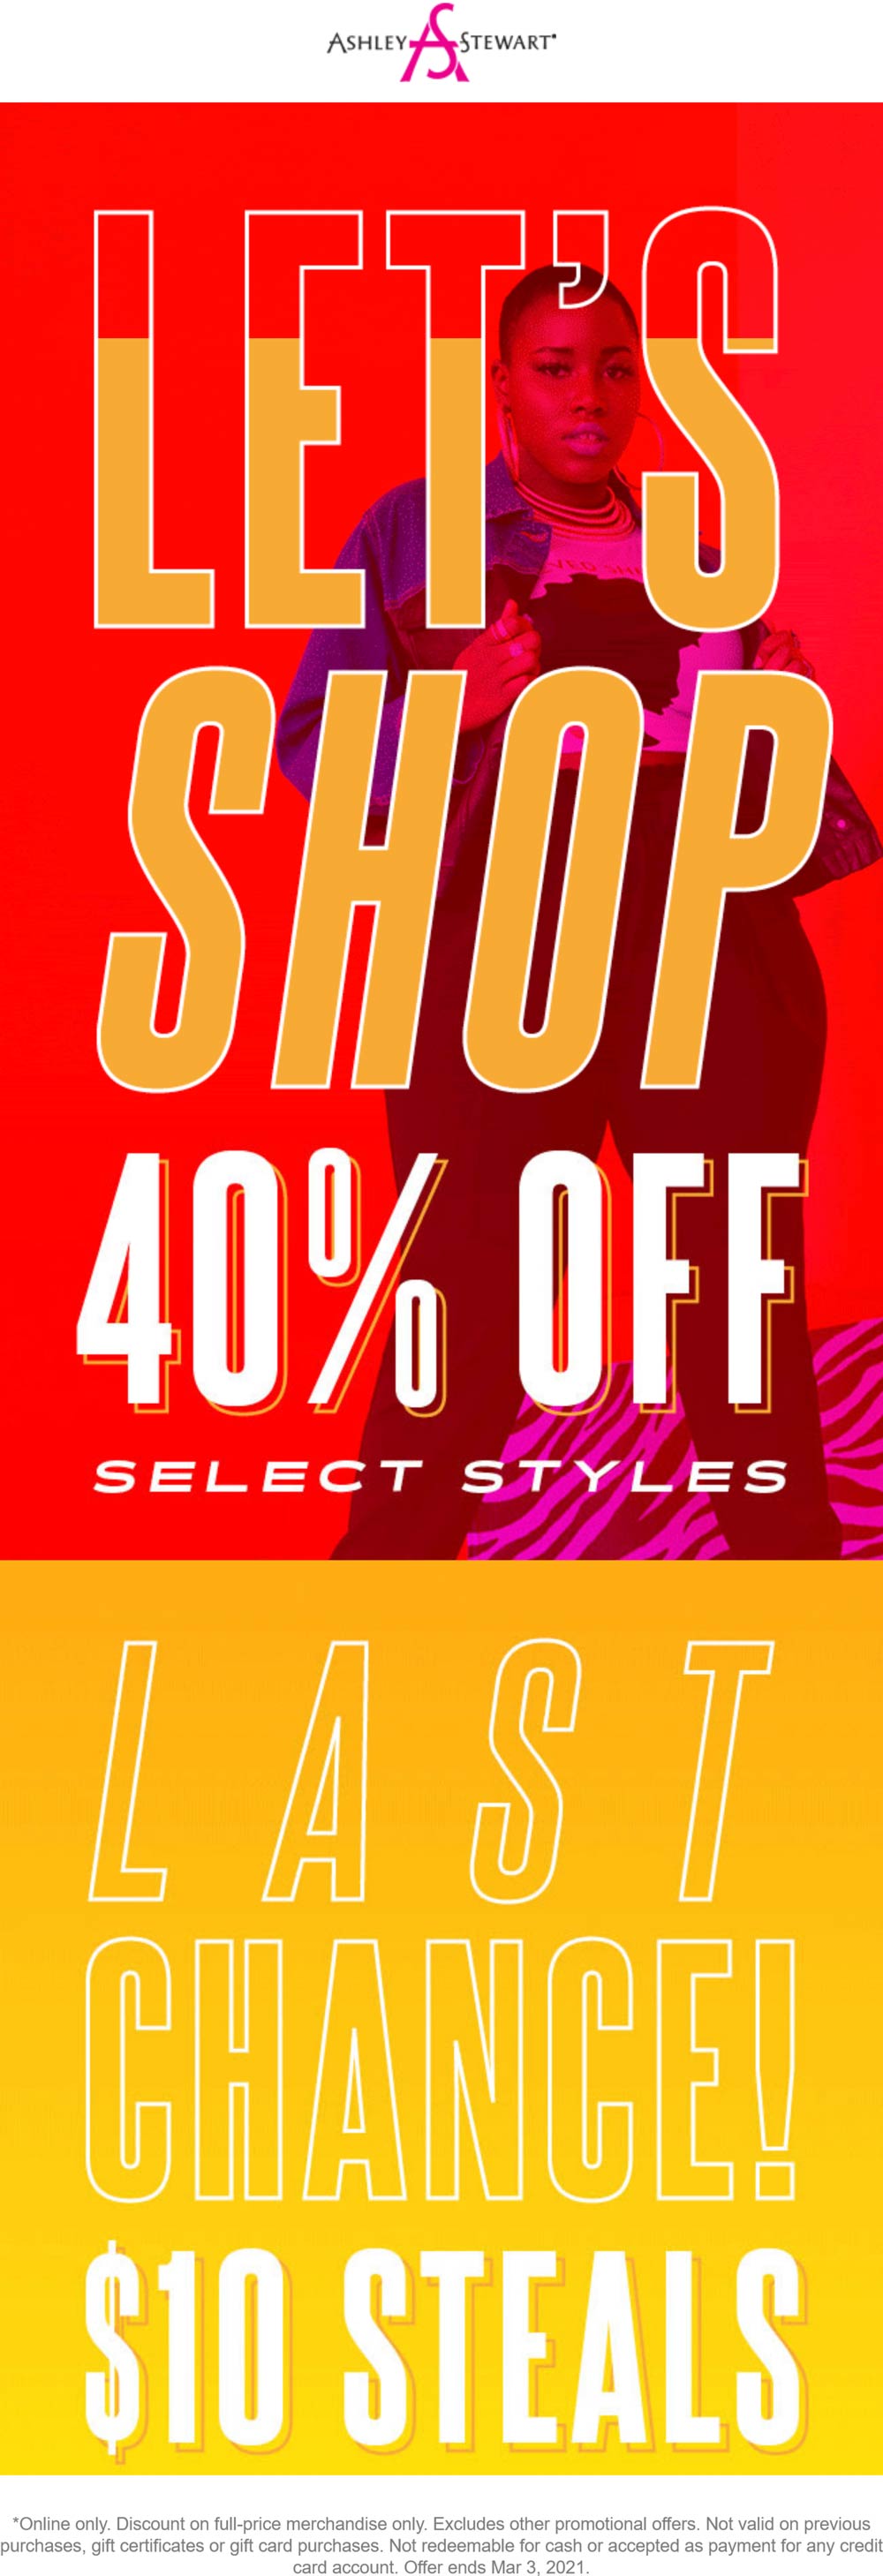 Ashley Stewart stores Coupon  40% off various styles today at Ashley Stewart #ashleystewart 